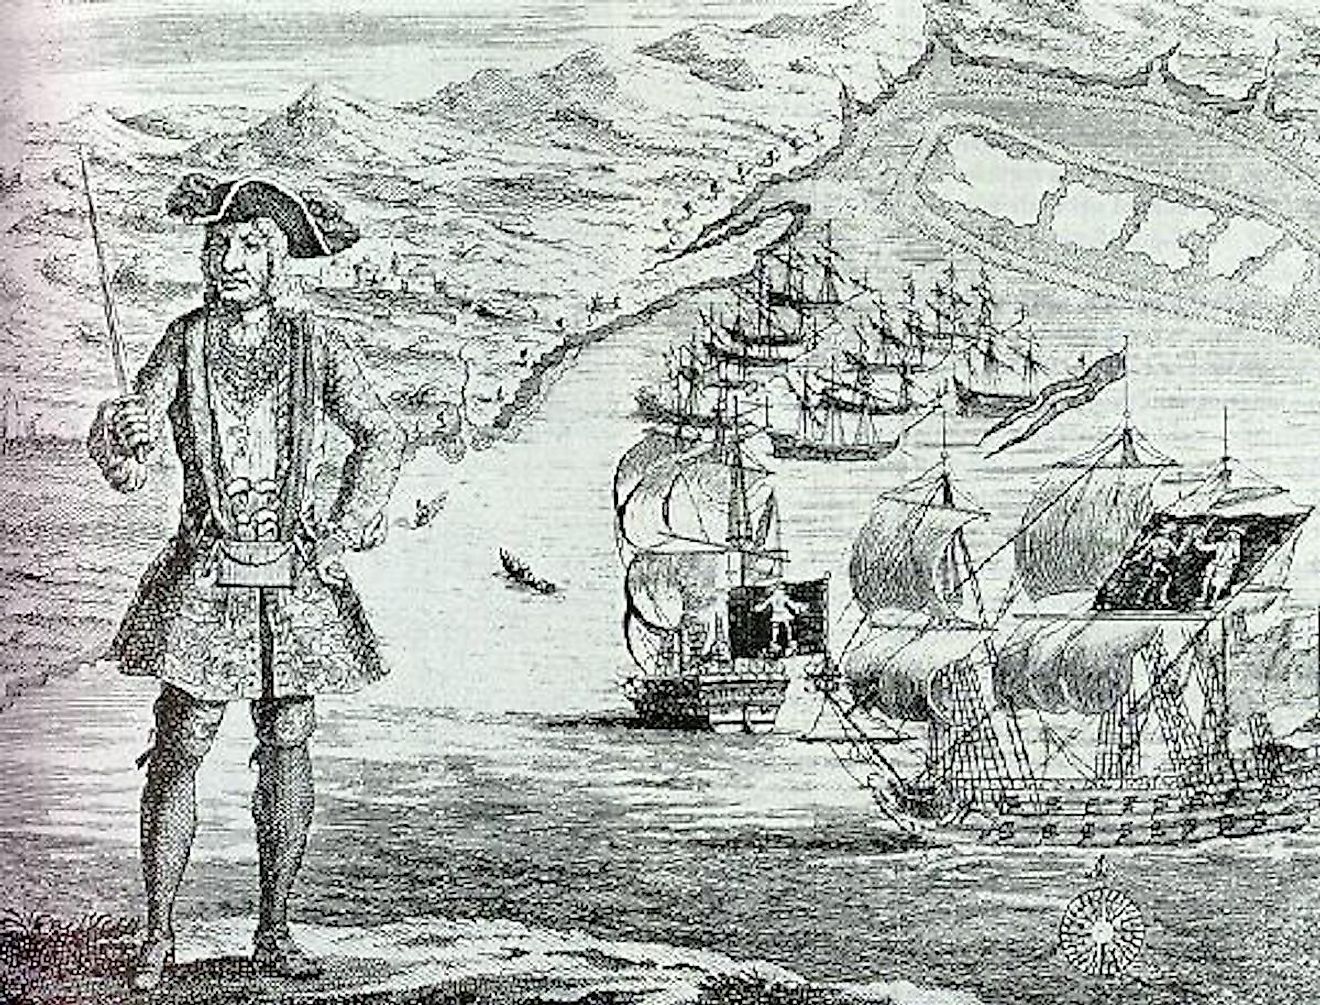 Bartholomew Roberts with his ship and captured merchant ships in the background. Image credit: Engraved by Benjamin Cole (1695–1766)/Public domain